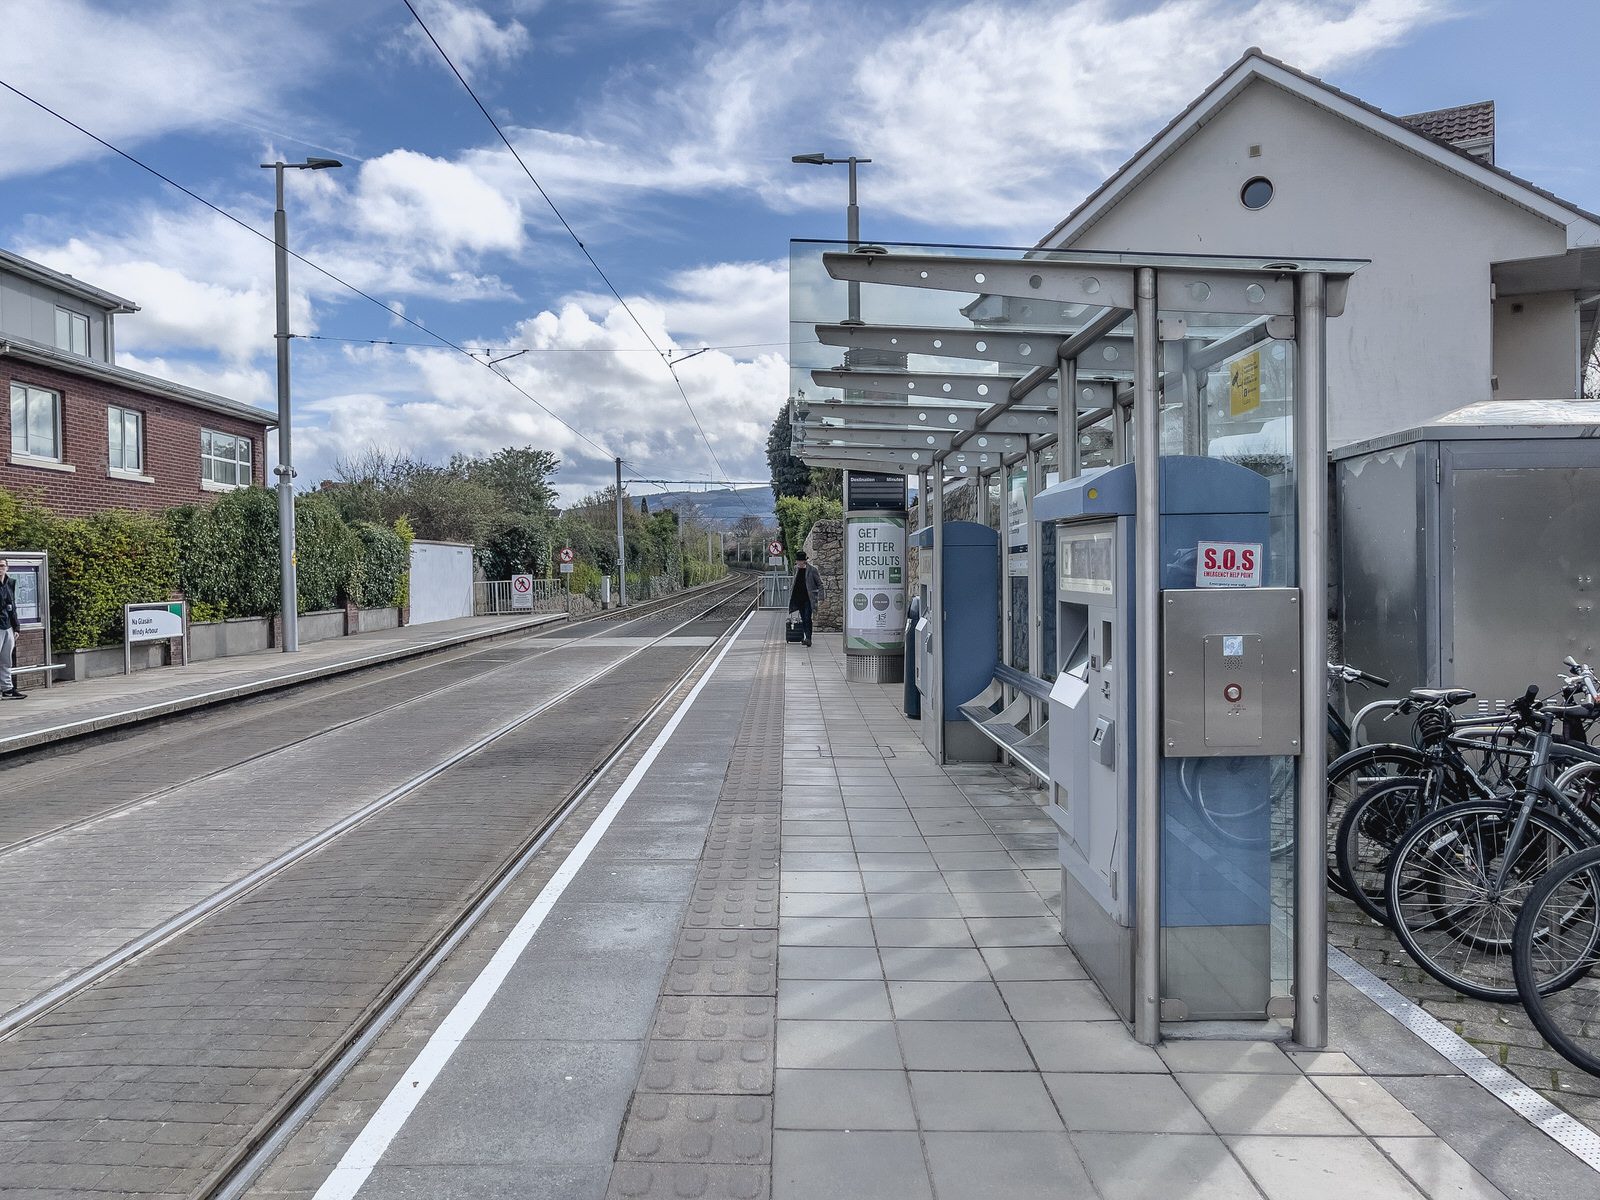 THE LUAS TRAM STOP AT WINDY ARBOUR AND THE IMMEDIATE AREA 021